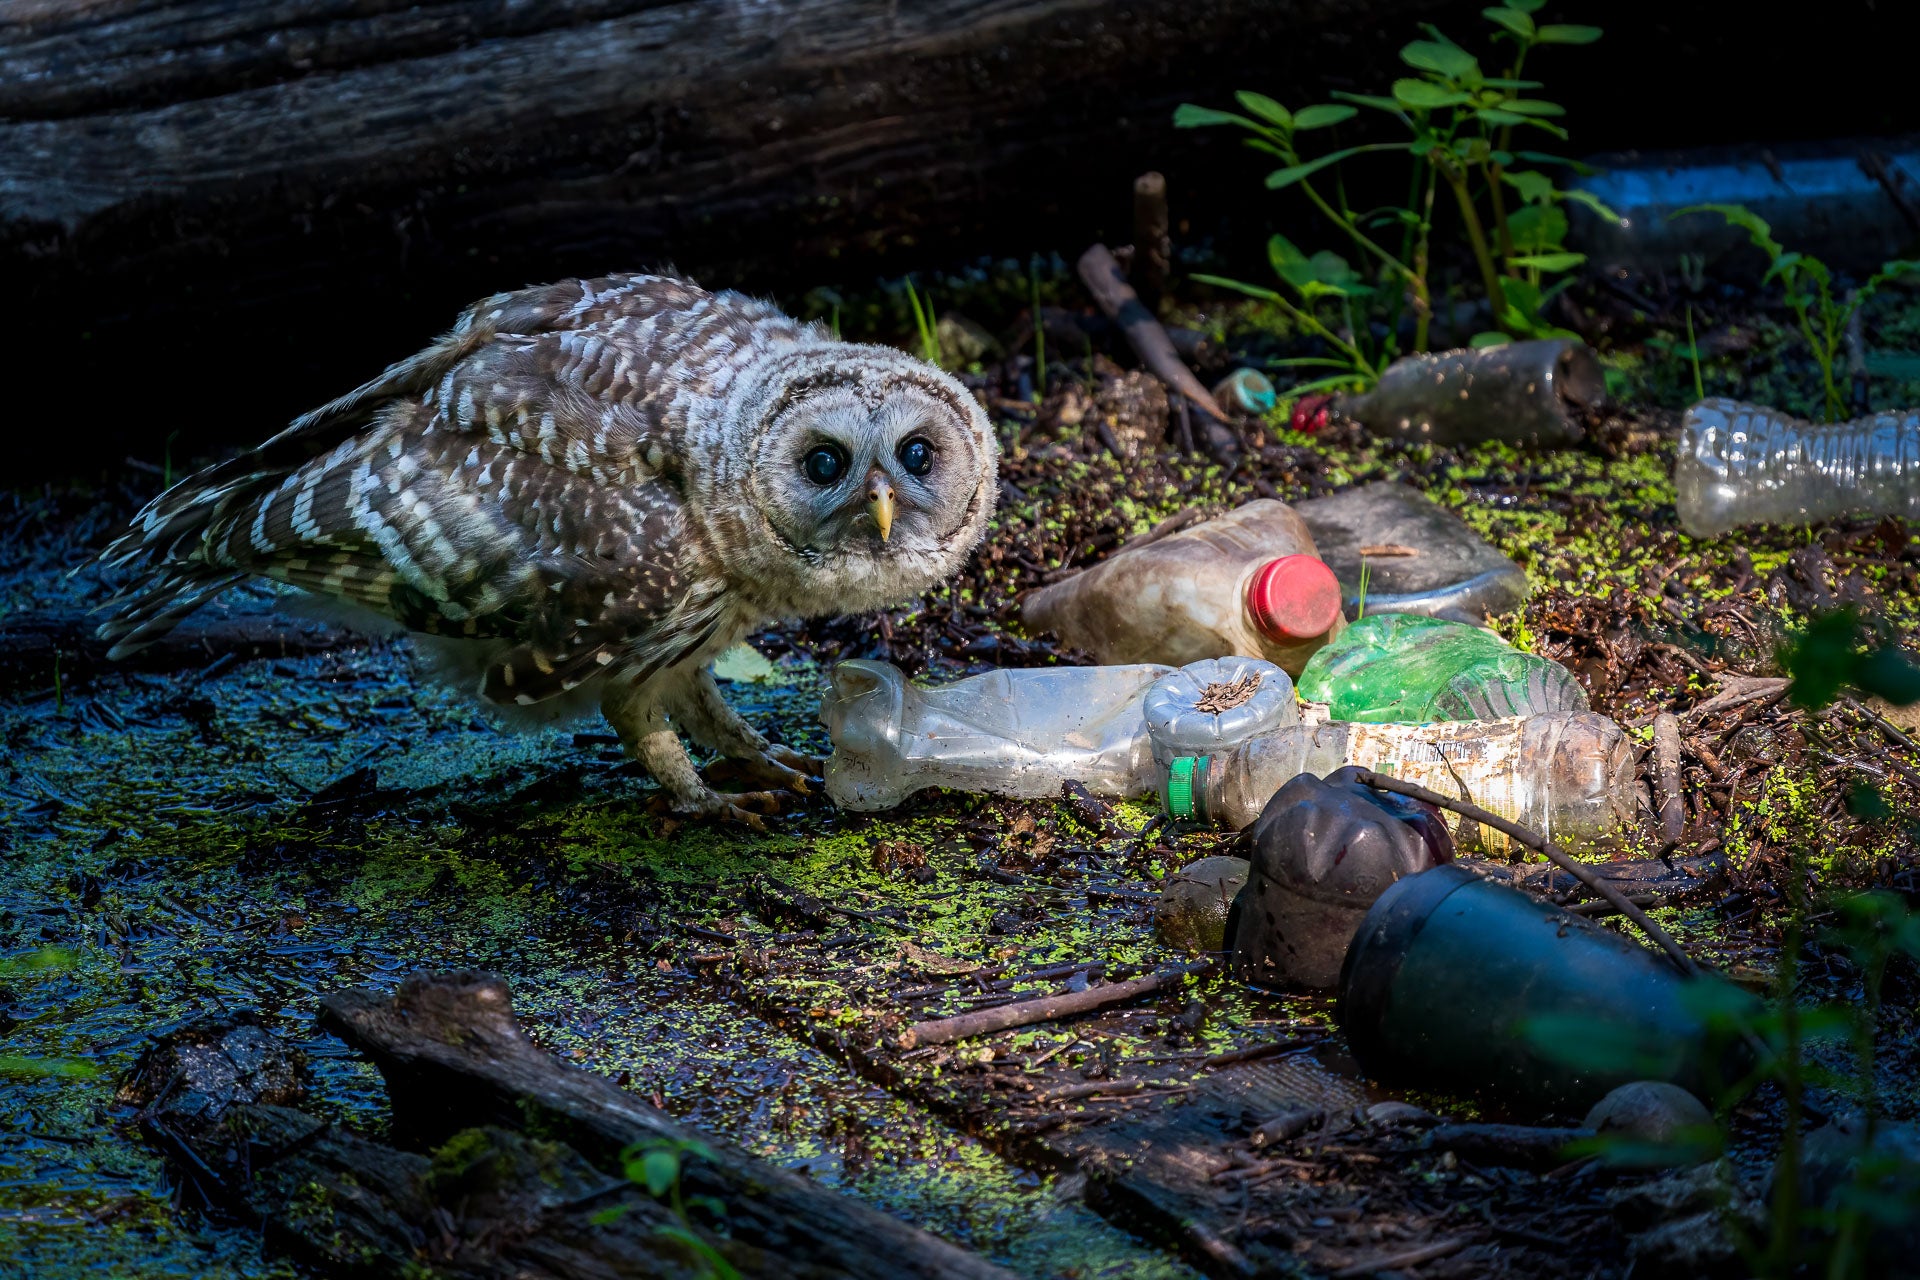 An owlet casts a forlorn figure next to human refuse in a forest. (Photo: Kerry Wu)